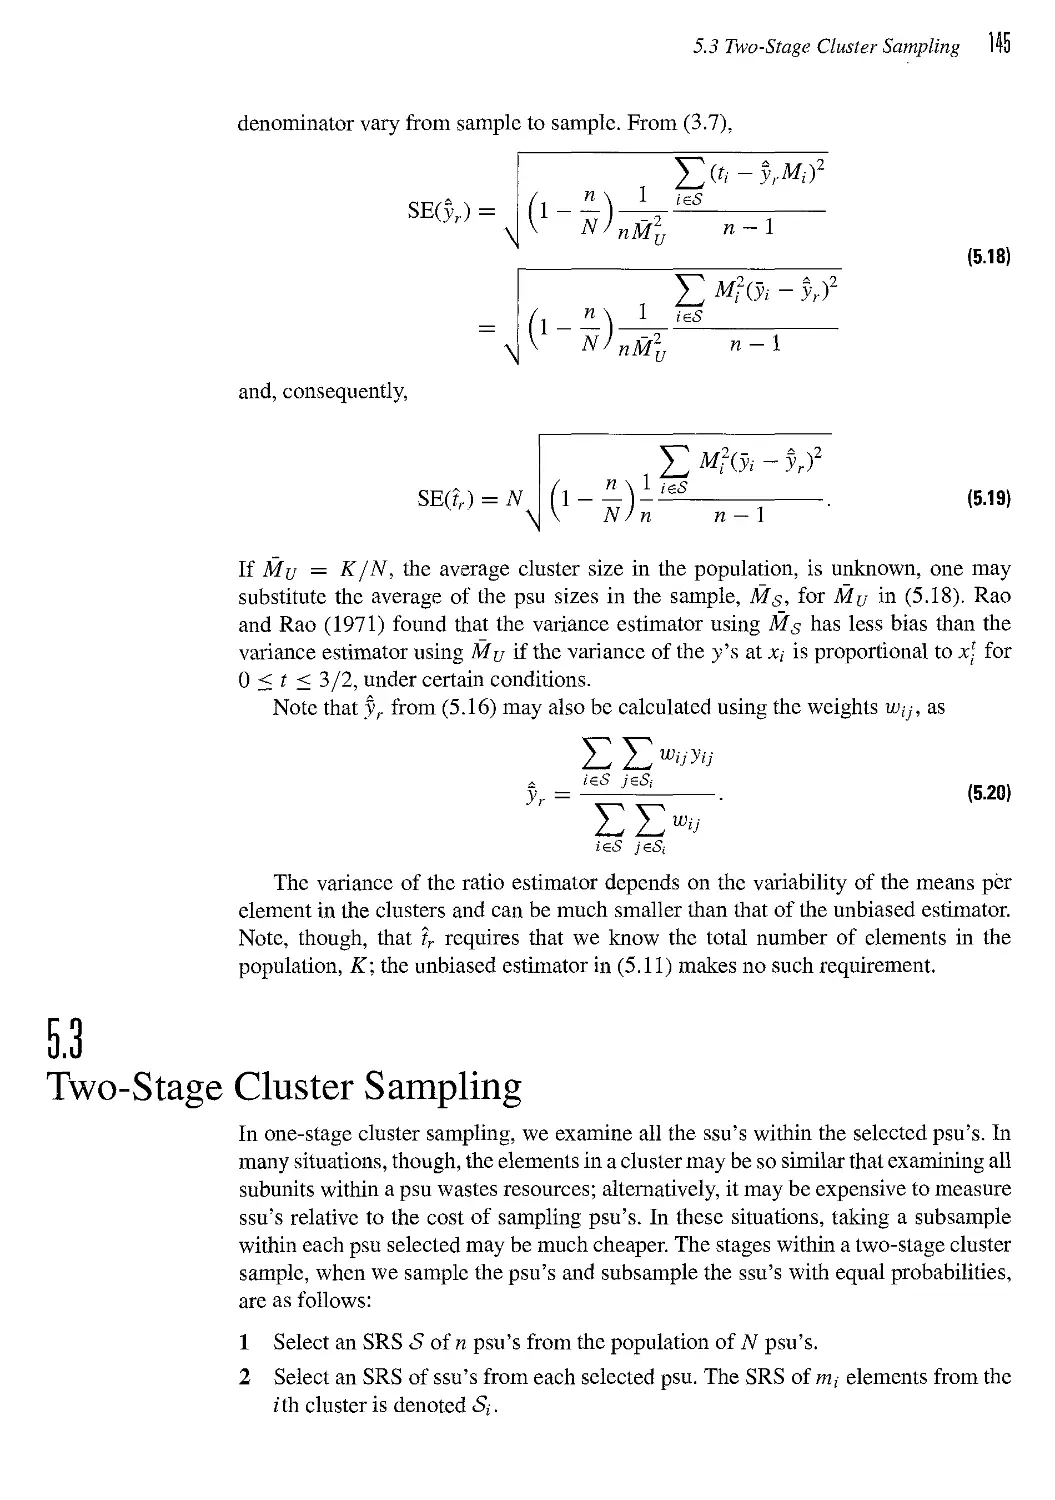 5.3 Two-Stage Cluster Sampling